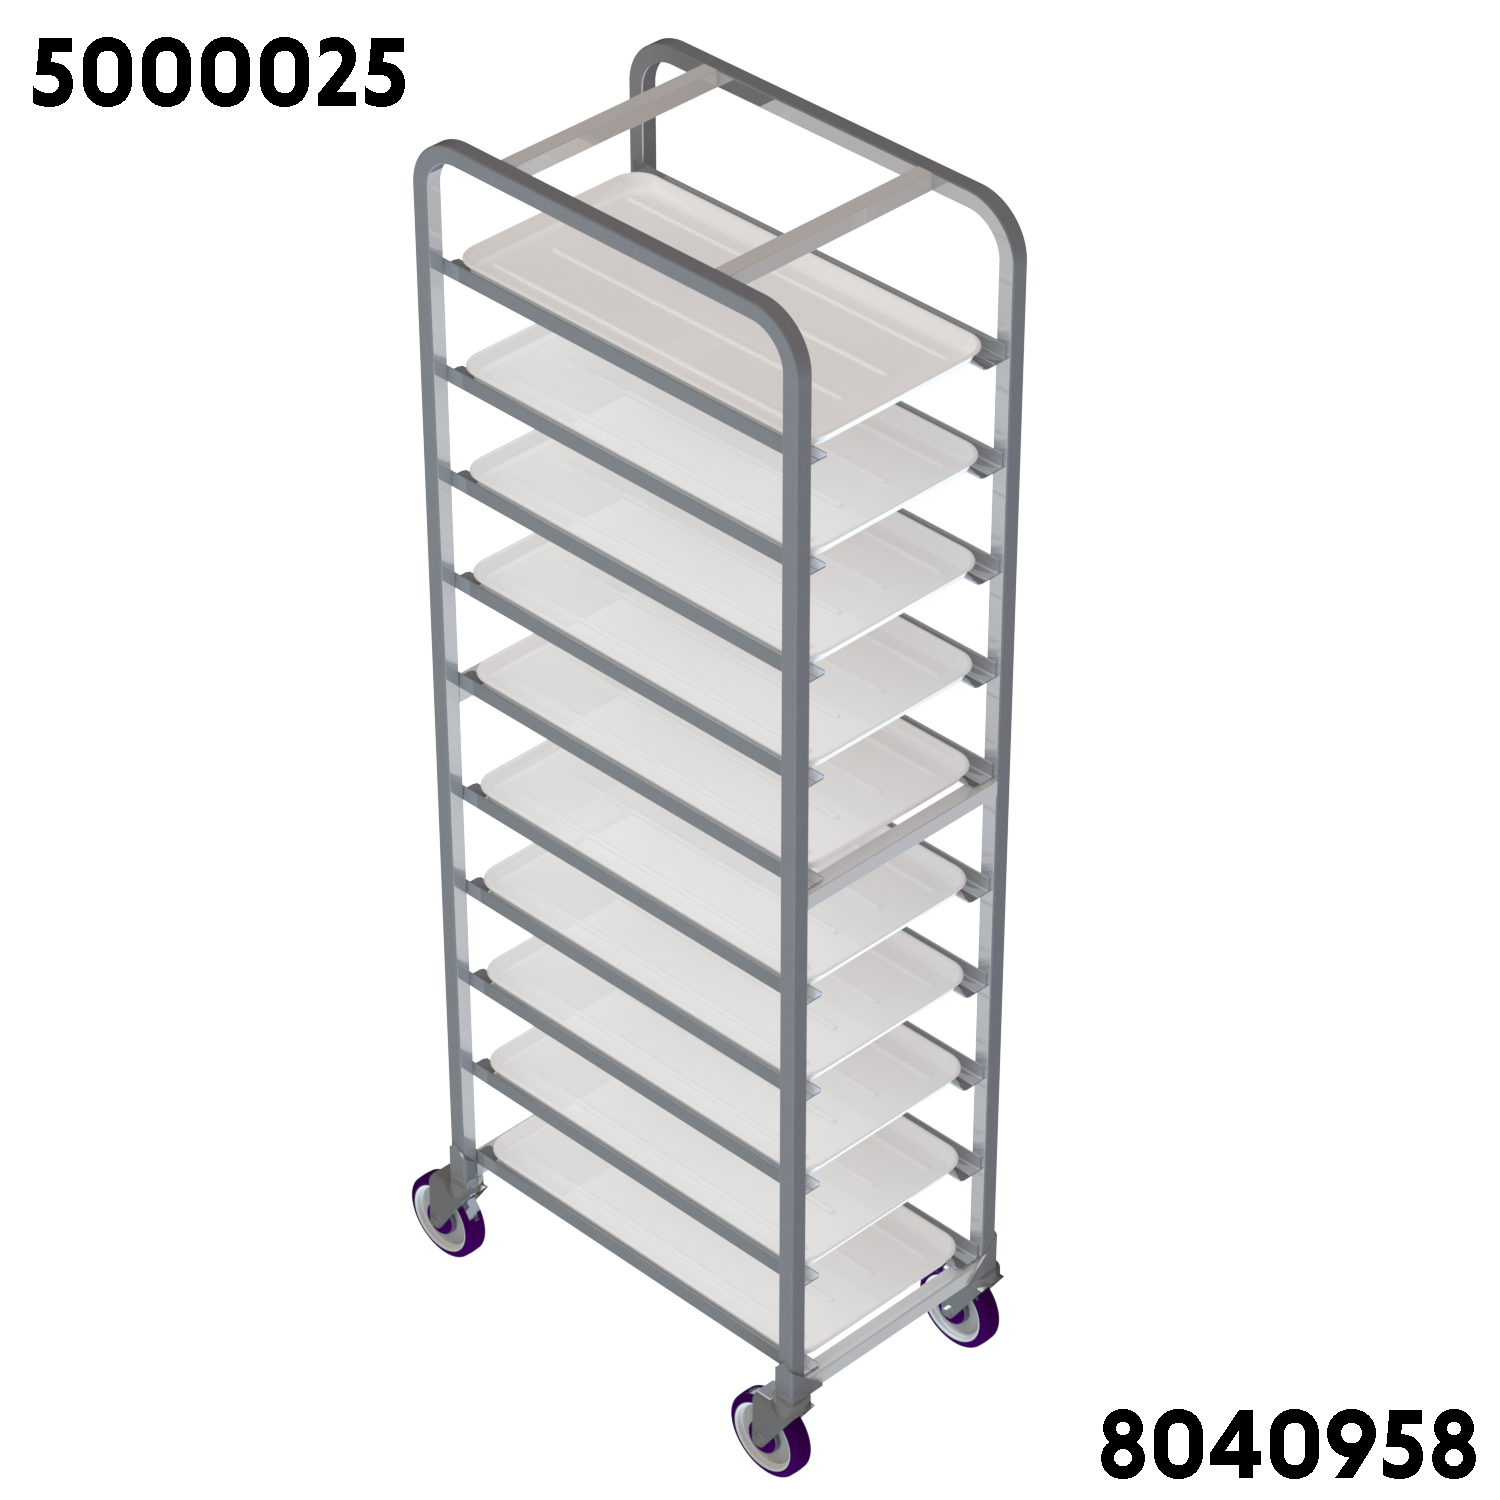 Built to last. Sanitary square aluminum tube with heavy gauge aluminum angle runners. nest dollies industrial cart nesting picking cart NSF cart NSF rack NSF approved NSF certified National Sanitation Foundation tray shelf Distribution Cart picking cart tray shelf picking cart, picking cart, ecom cart, ecommerce cart, ecommerce picking cart, picking cart, INDUSTRIAL CARTS, grocery cart grocery picking cart, department store cart, beverage cart NSF approved. This food service cart meets strict standards and procedures imposed by NSF. lug cart meat department, produce department